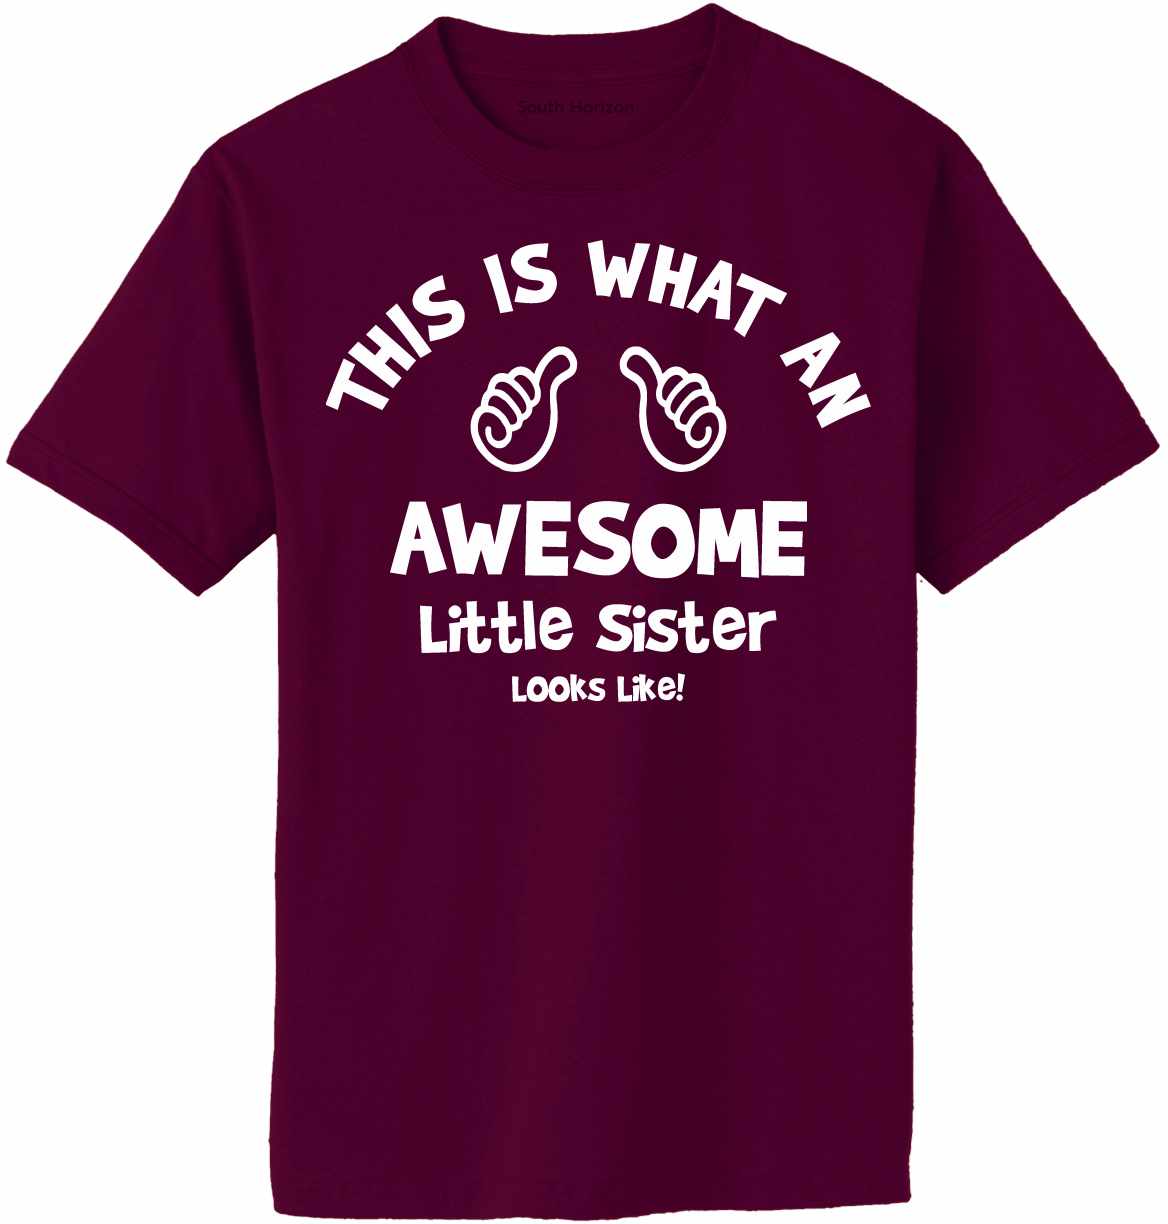 This is What an AWESOME LITTLE SISTER Looks Like Adult T-Shirt (#1037-1)